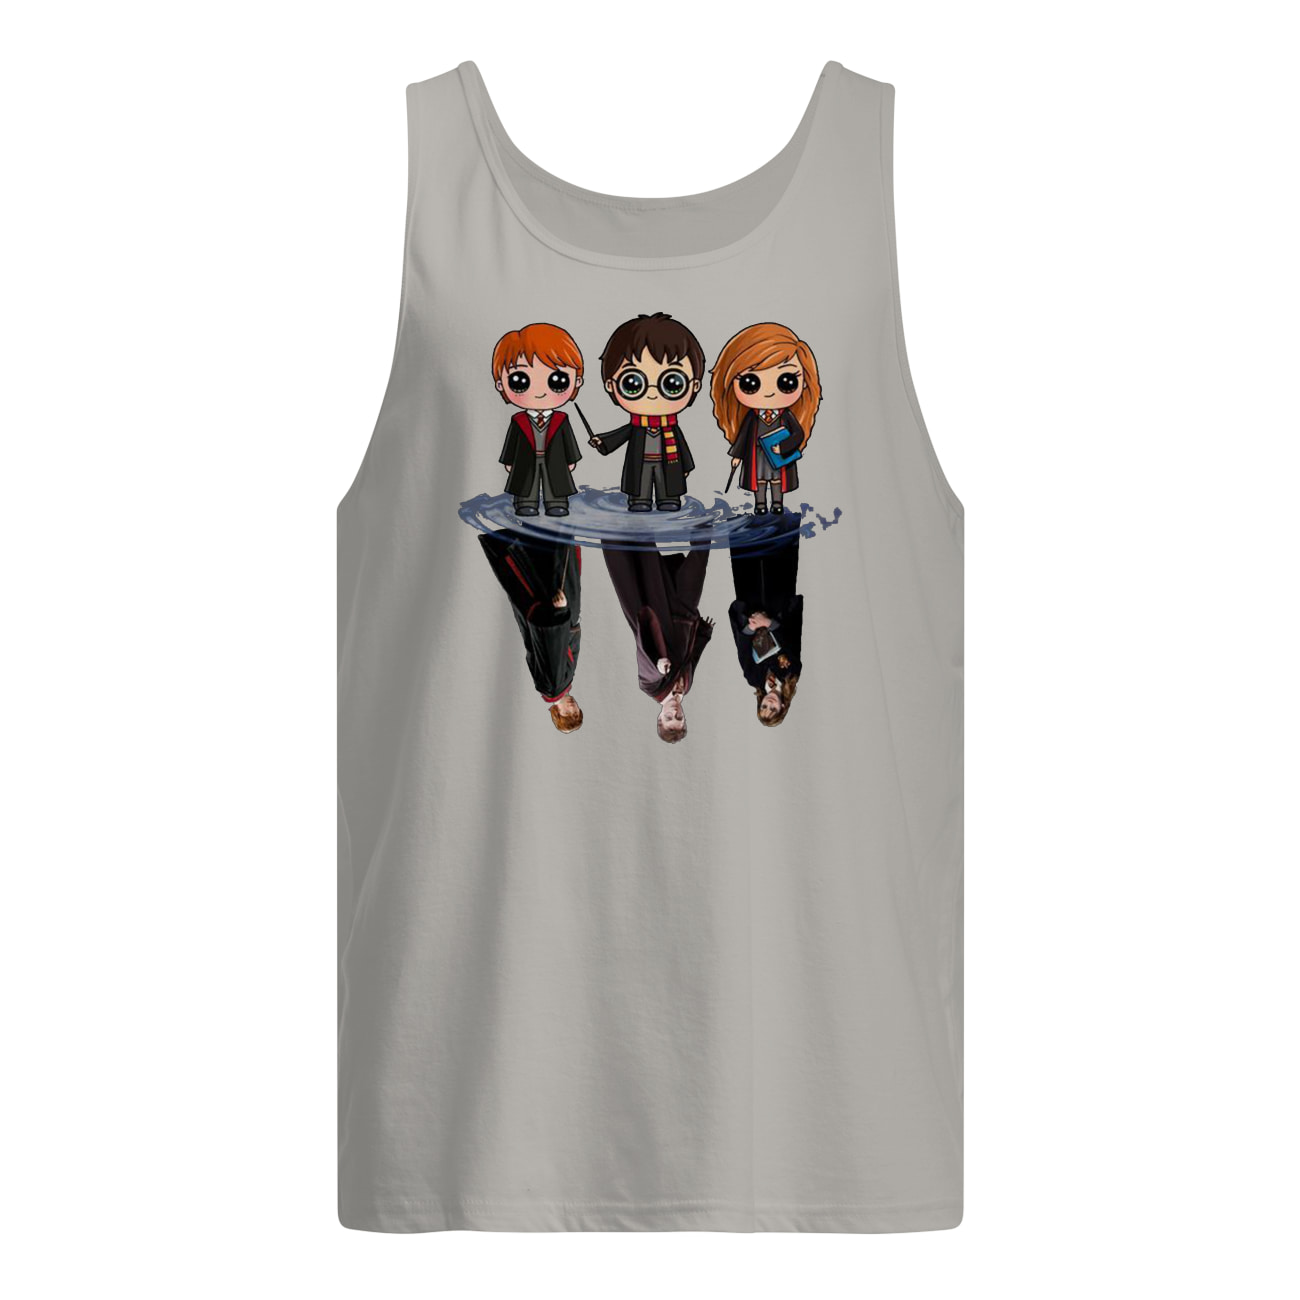 Harry potter characters chibi water mirror reflection tank top